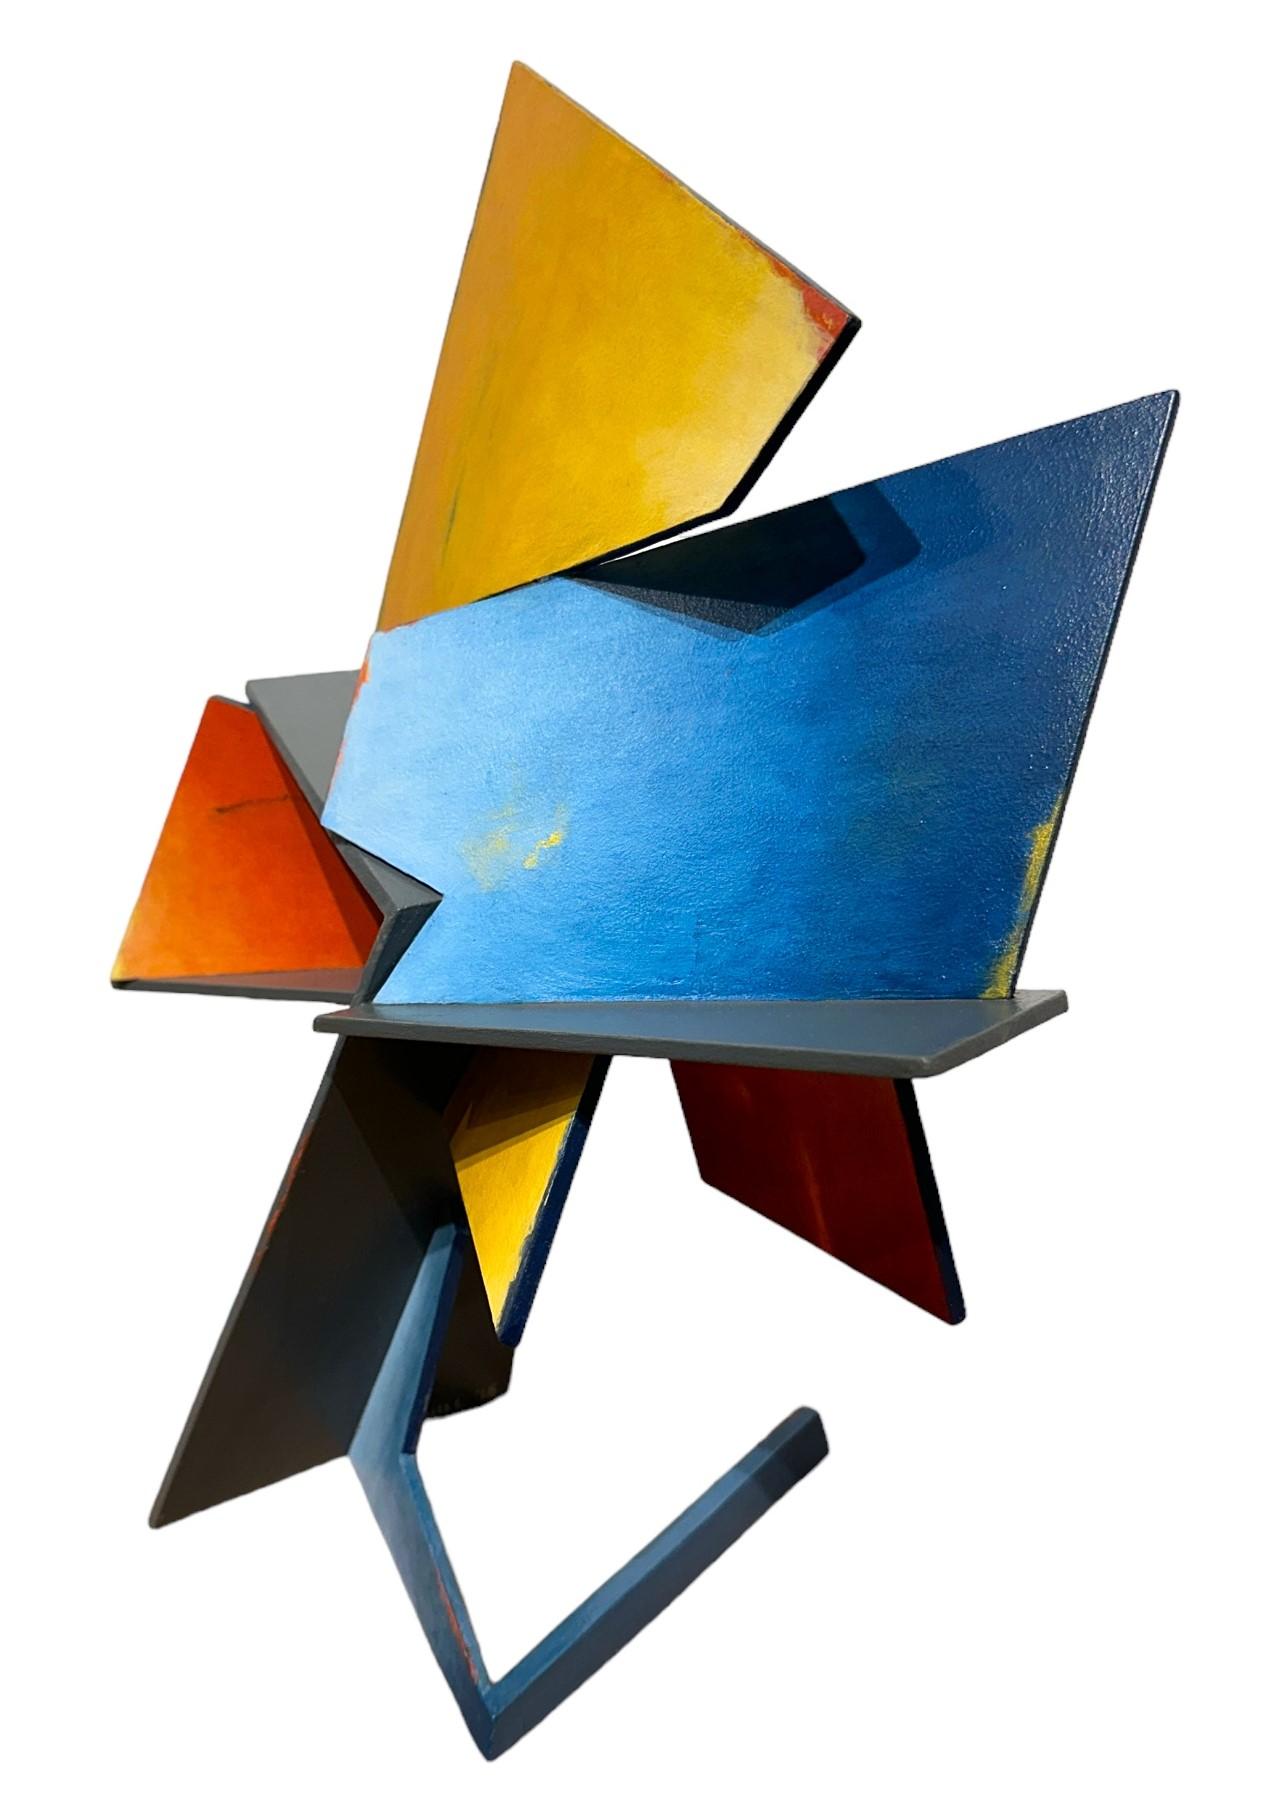 Zia Rising - Geometric Steel Sculpture, Welded Steel, Hand Painted Acrylic For Sale 2